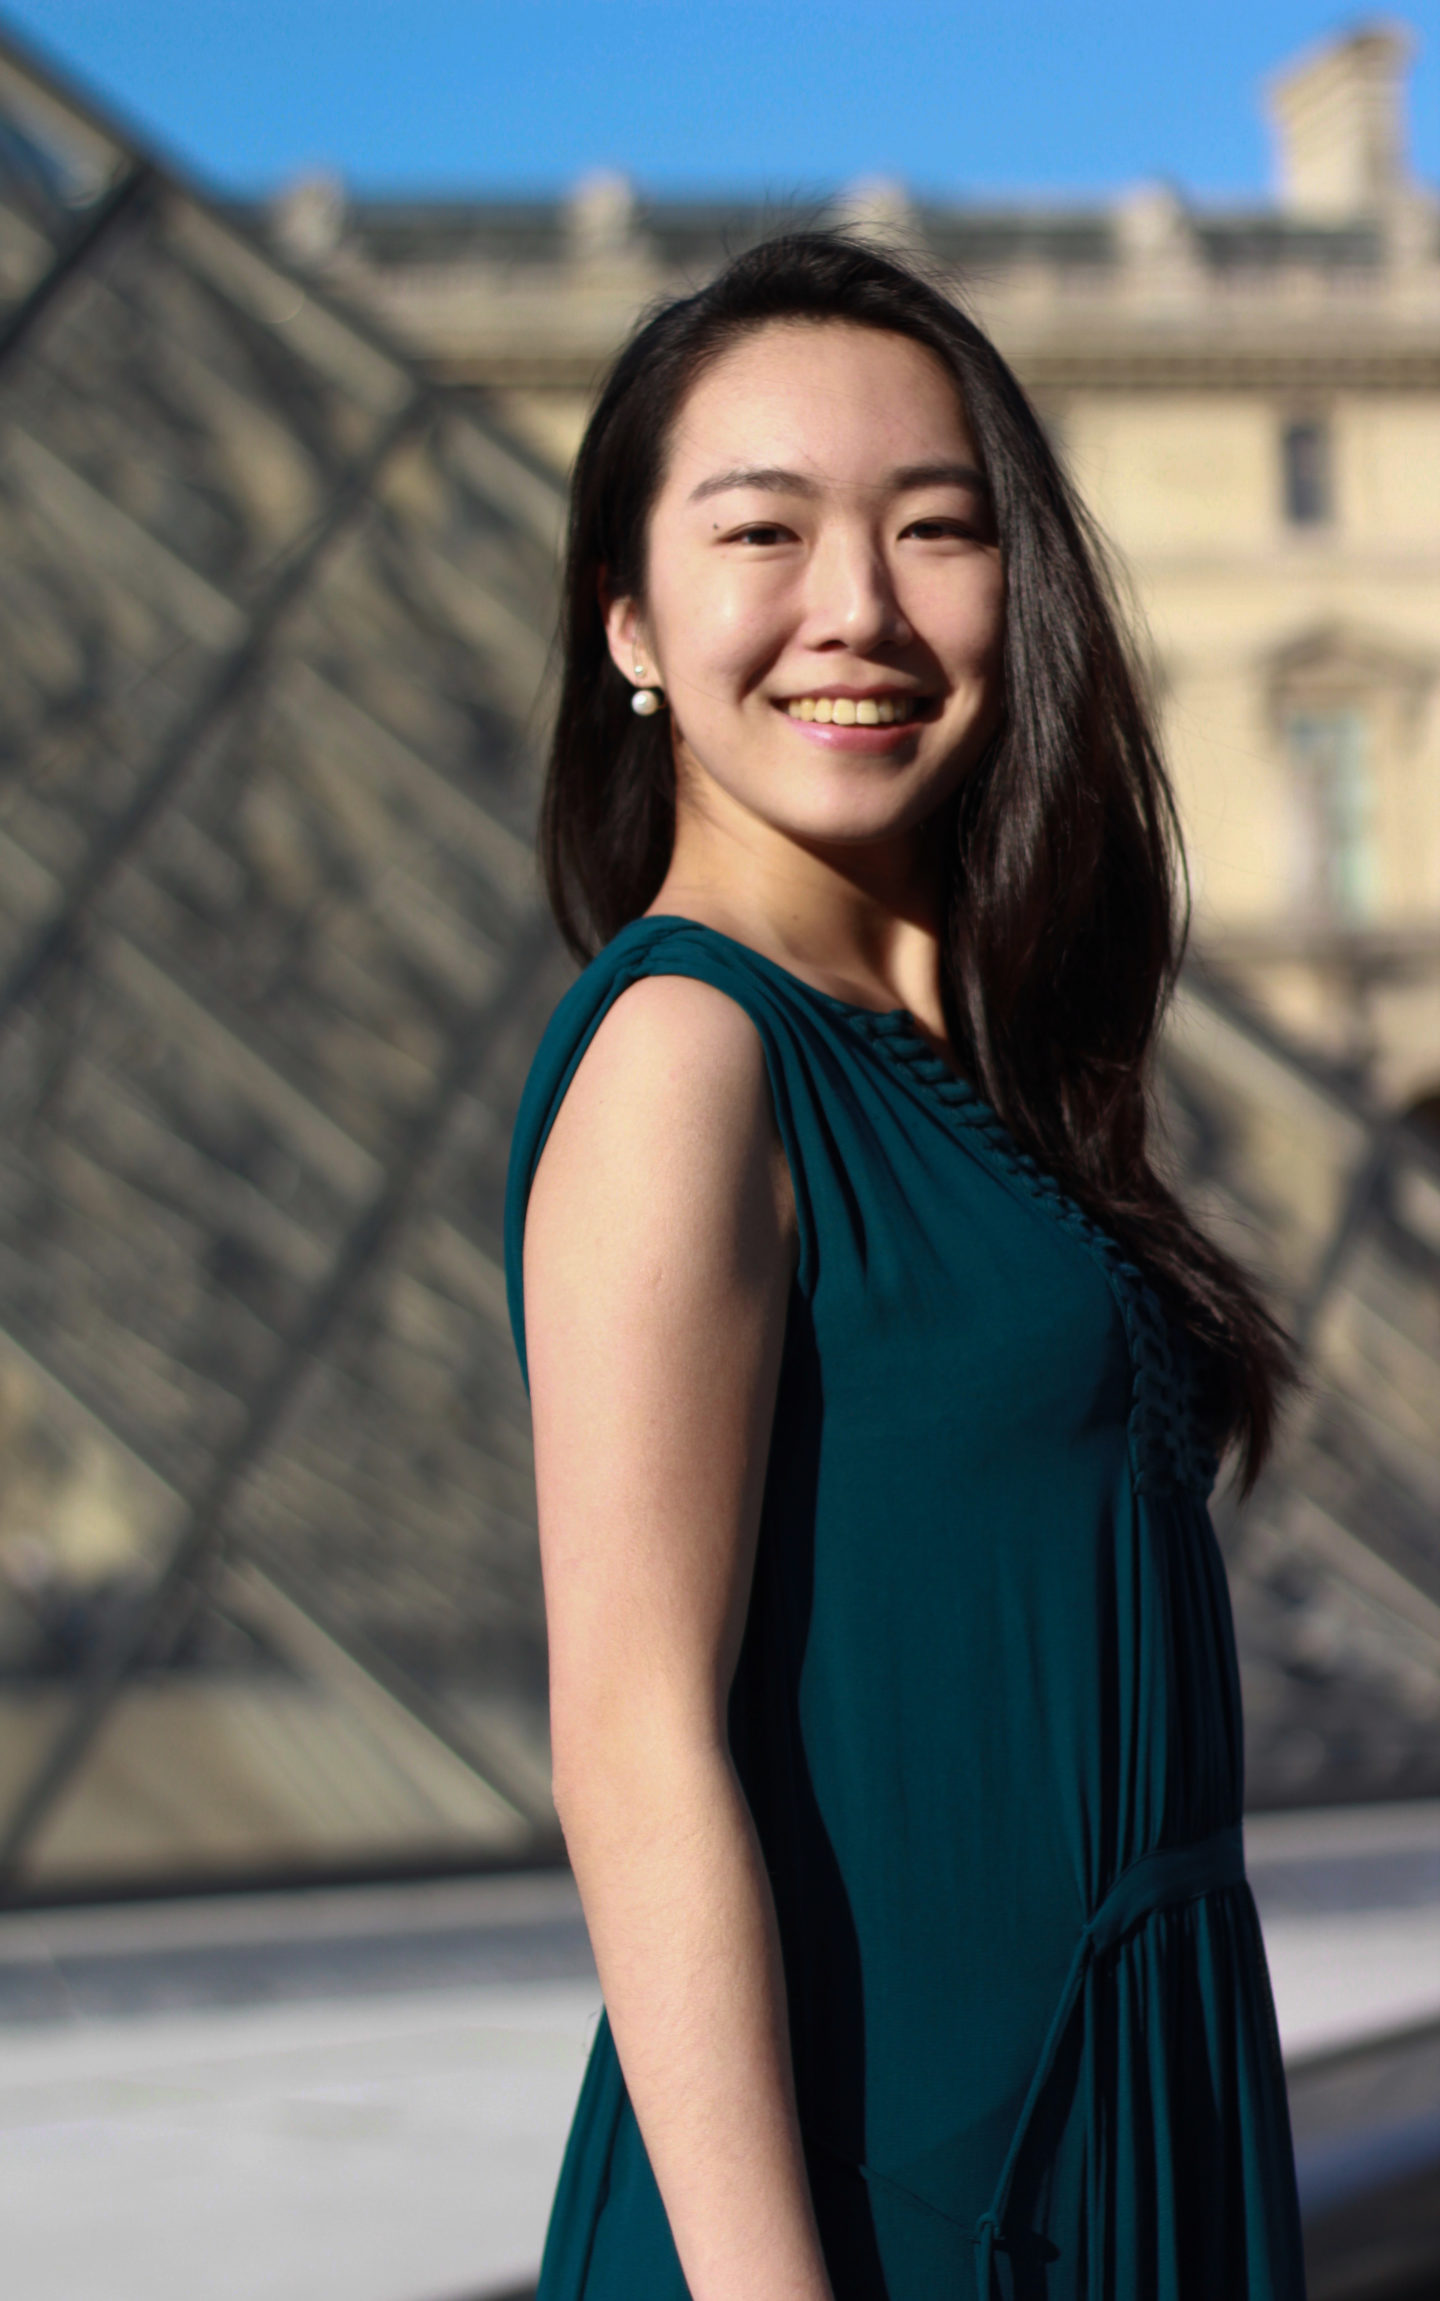 Asheley Gao on her passion for art at the Musée du Louvre